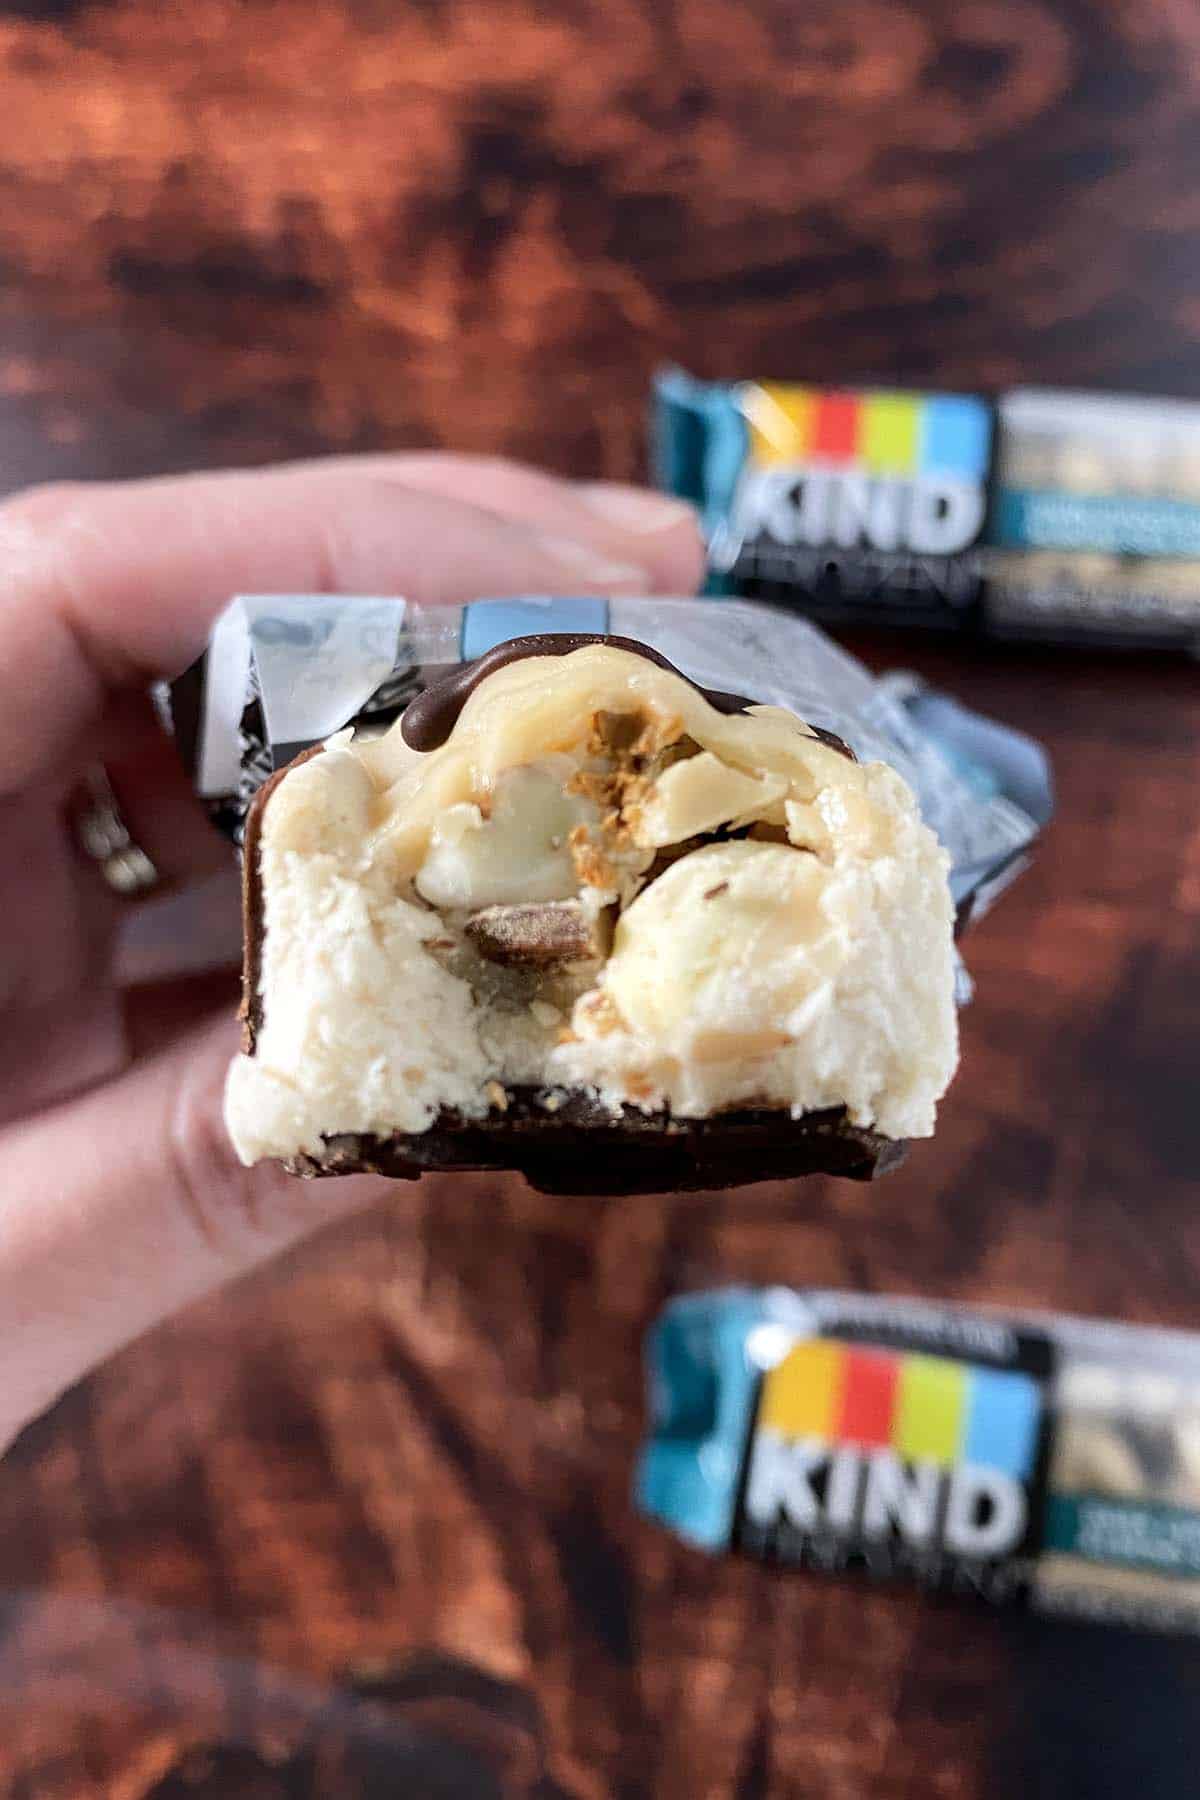 close-up of a KIND Frozen Treat Bar with a bite out, so you can see the inside